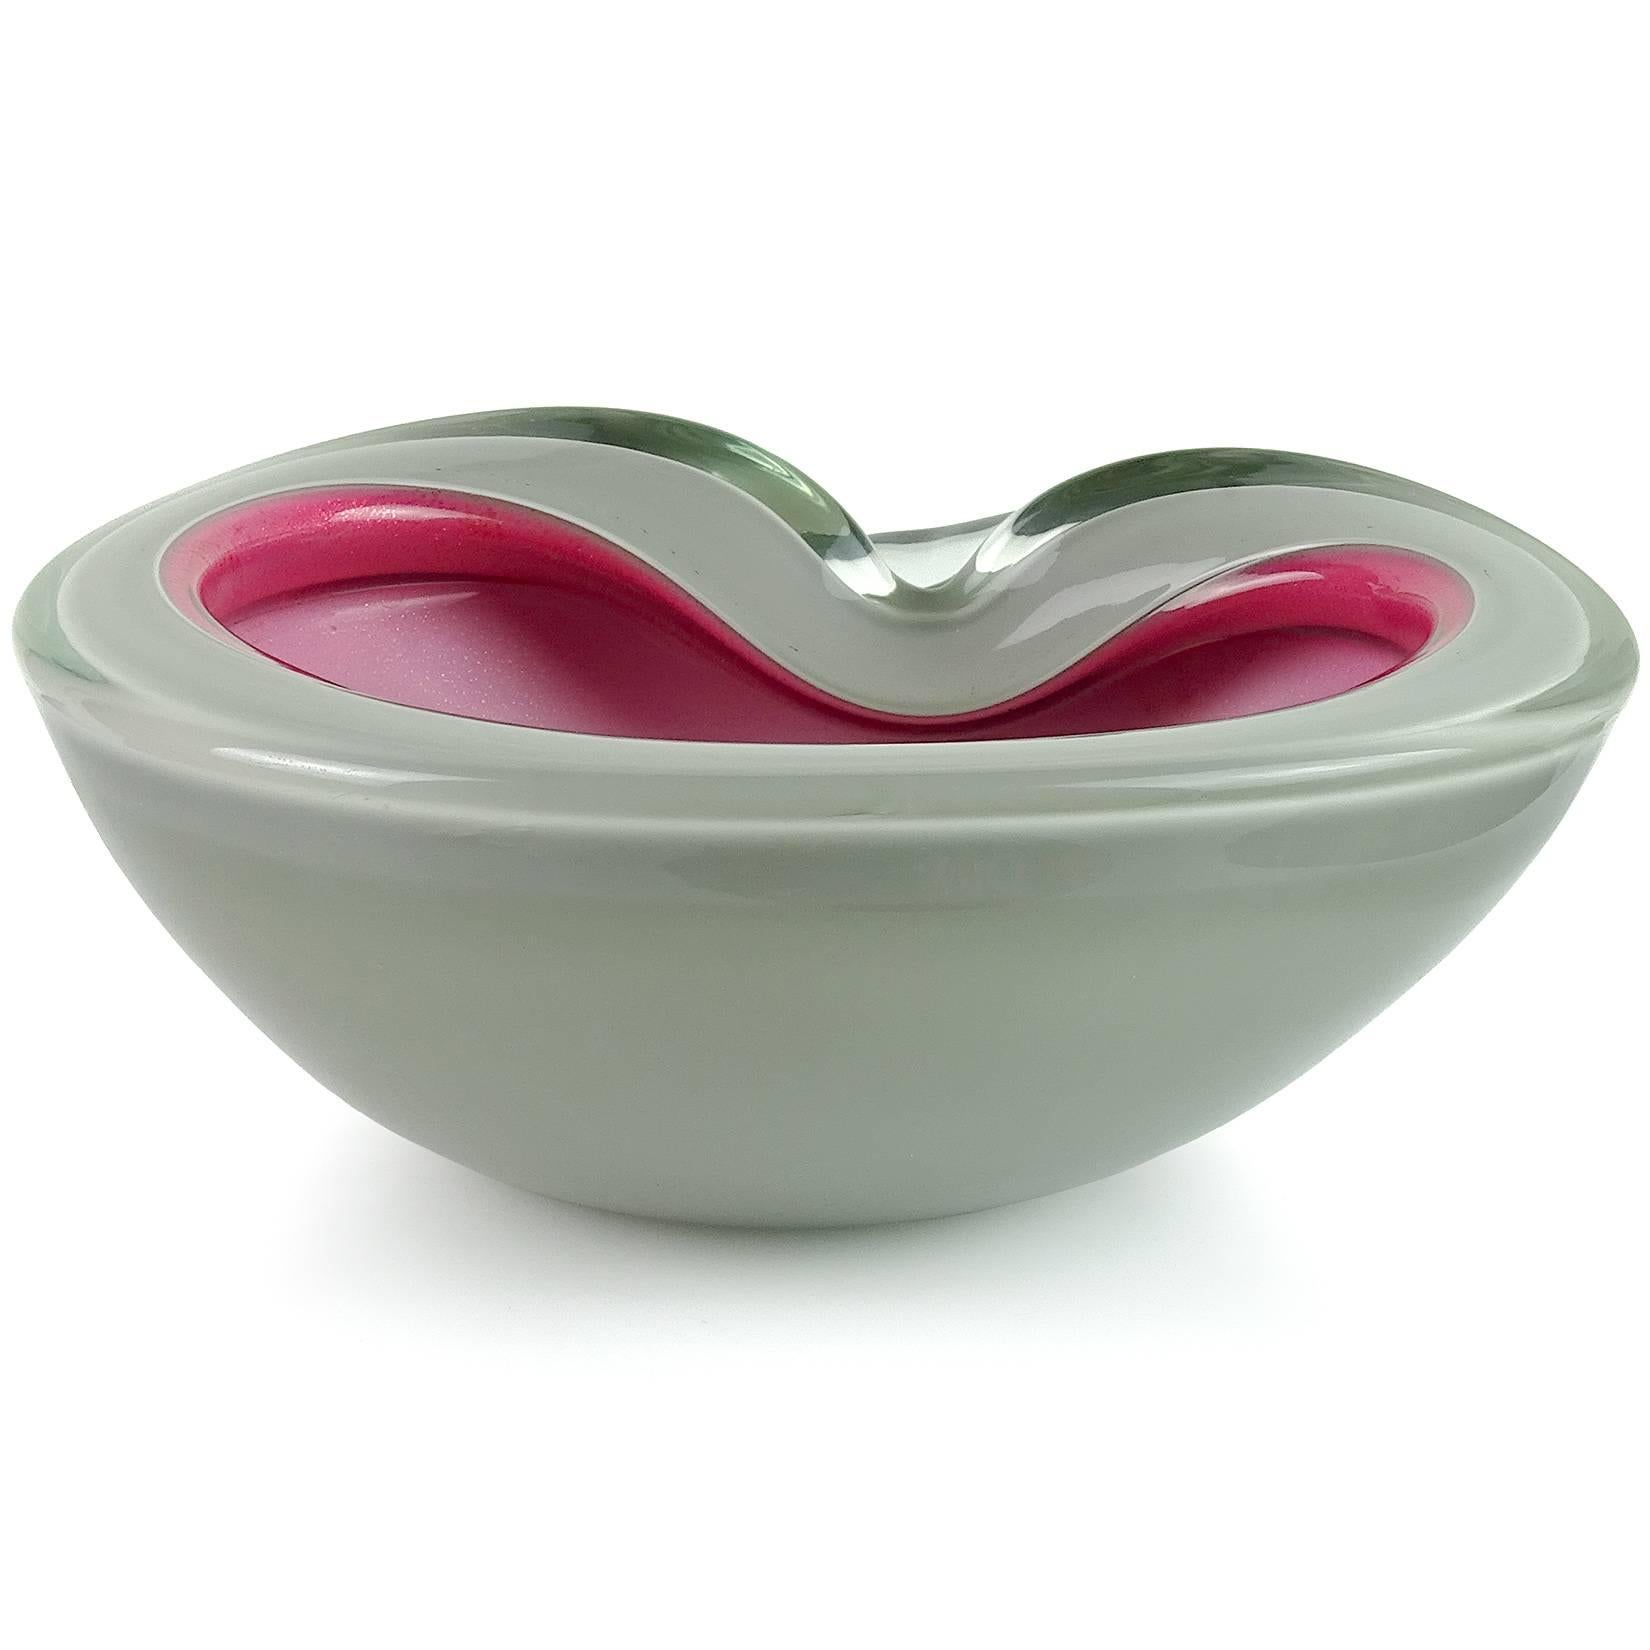 Beautiful Murano hand blown grey over fuchsia pink and gold flecks Italian art glass decorative bowl. Documented to designer Alfredo Barbini. The piece has a partial worn label underneath the bowl. Great accent piece for any table. Measures: 7 1/4